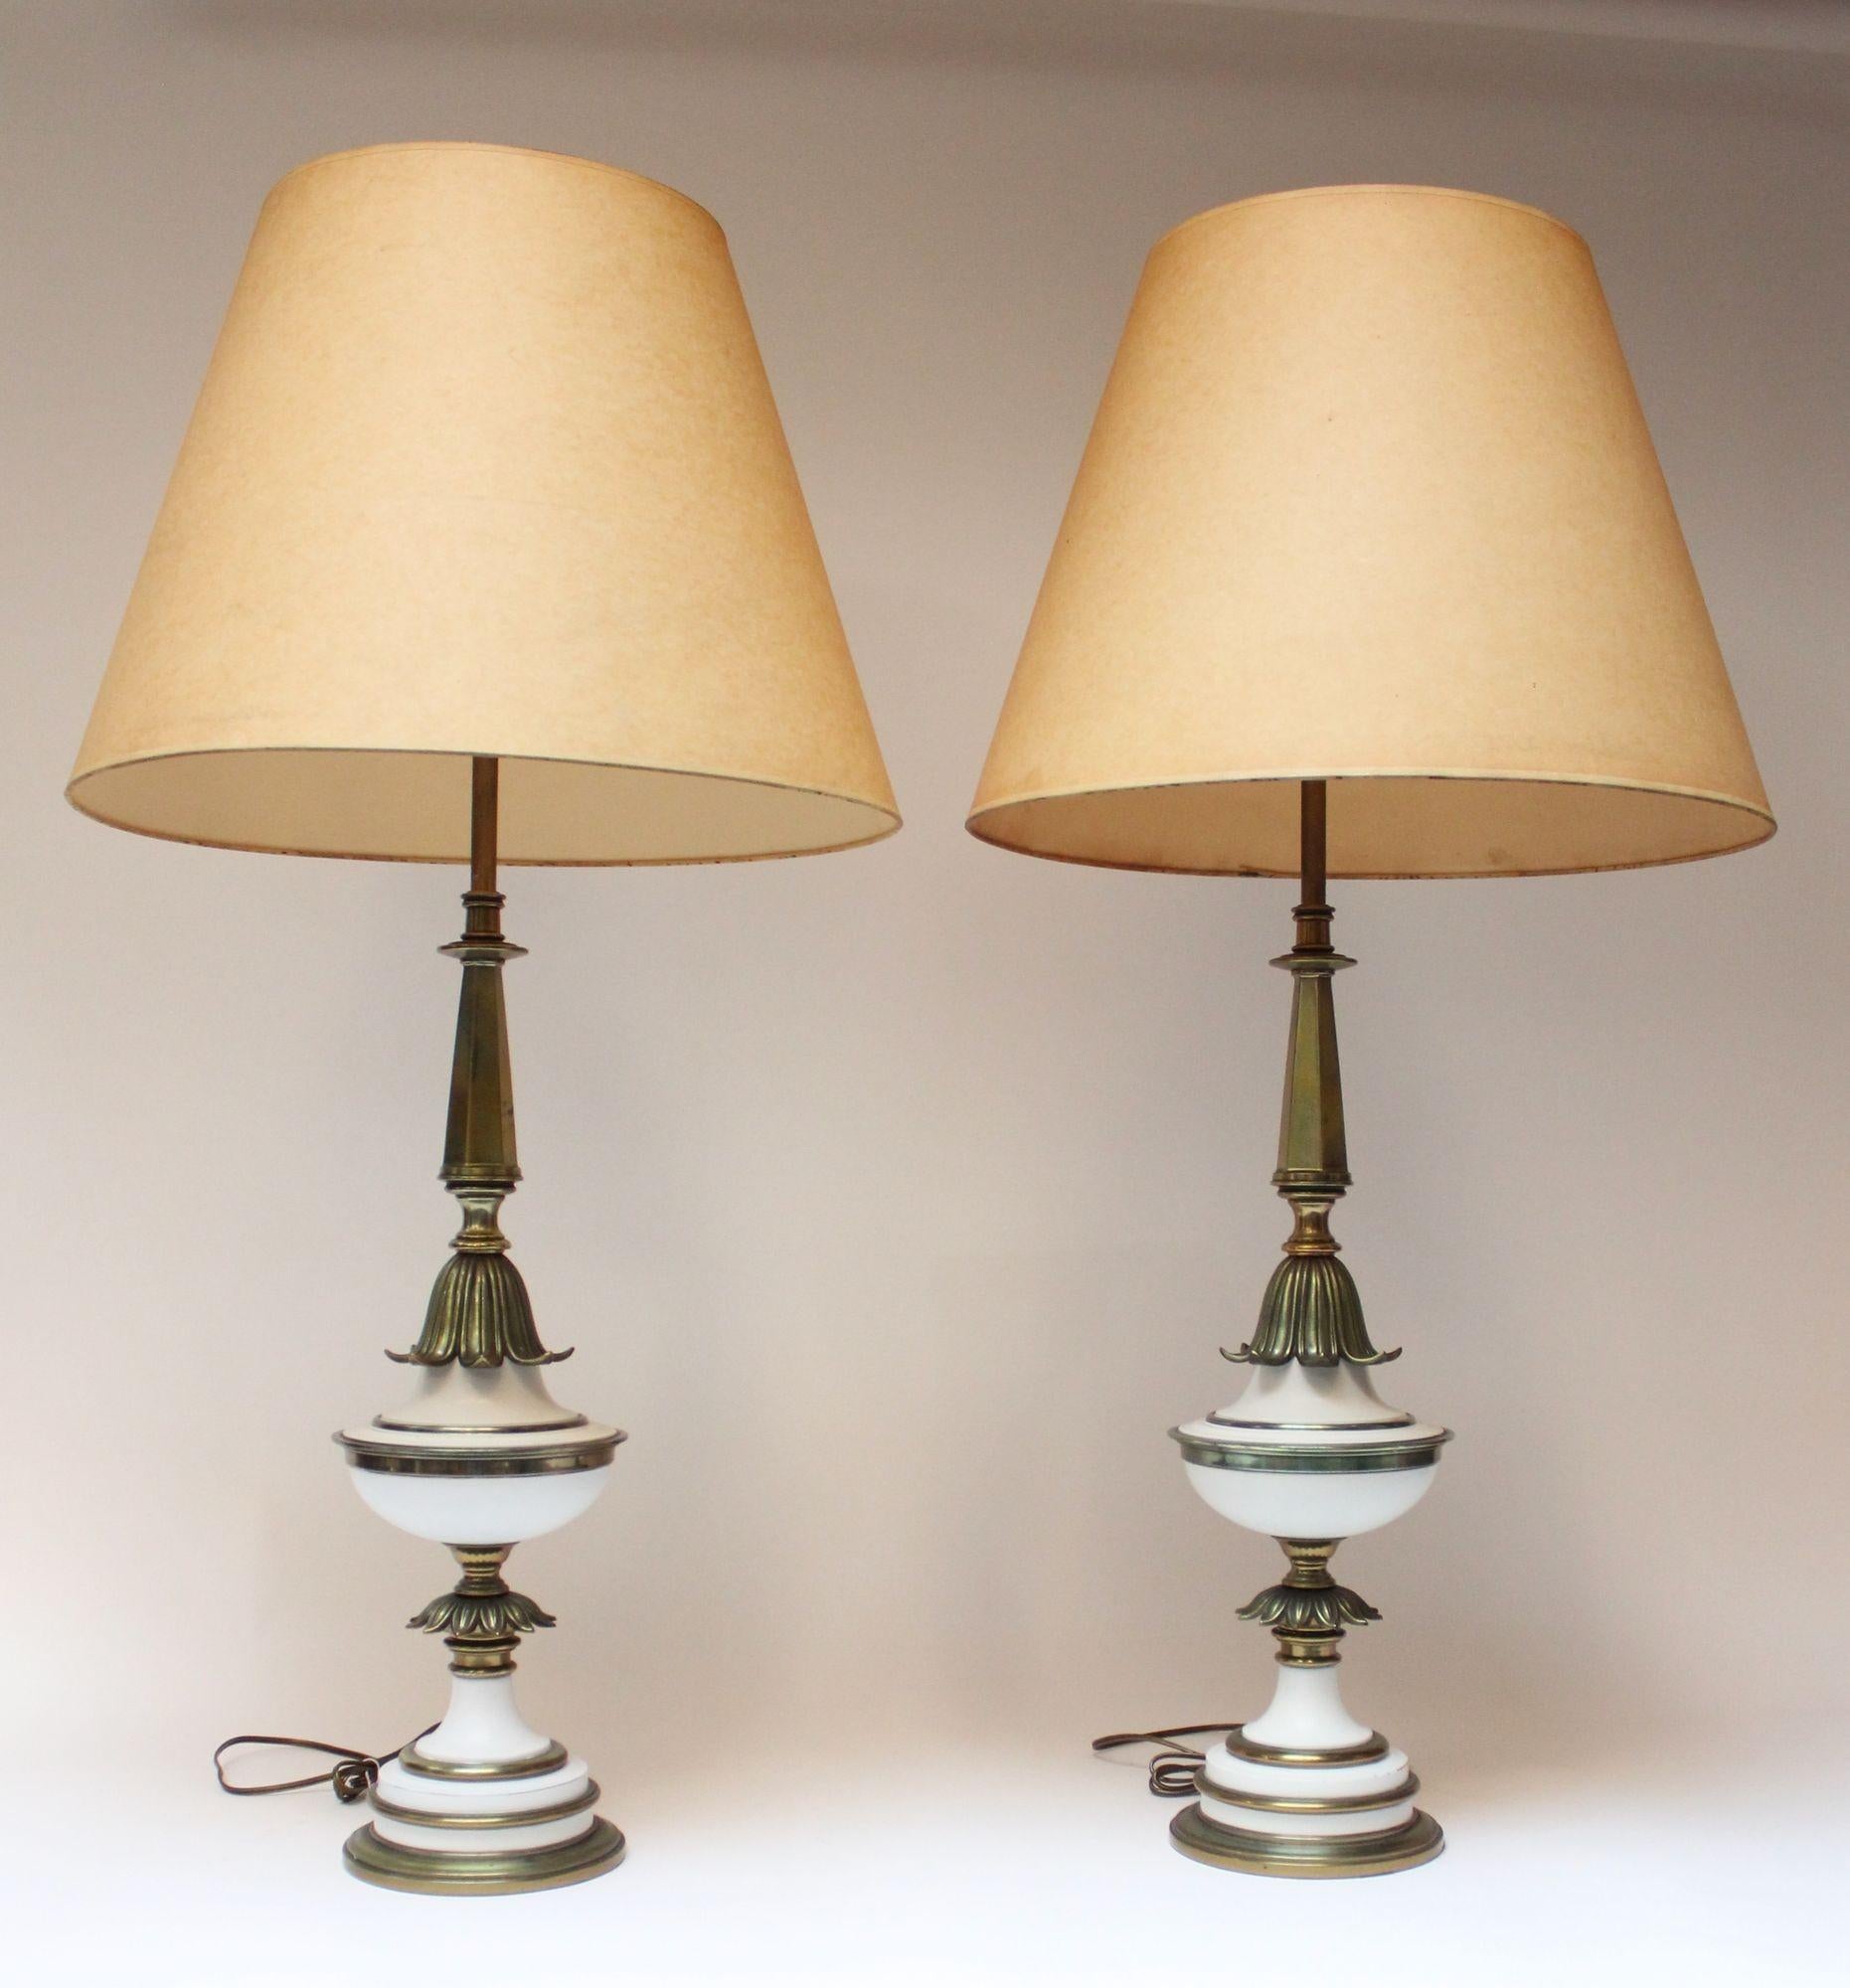 Statuesque Hollywood Regency-Style table lamps by Stiffel composed of solid brass stems and adornments with white enameled metal accents. Includes glass shades/diffusers only (the brown linen shades are for demonstration only and are not